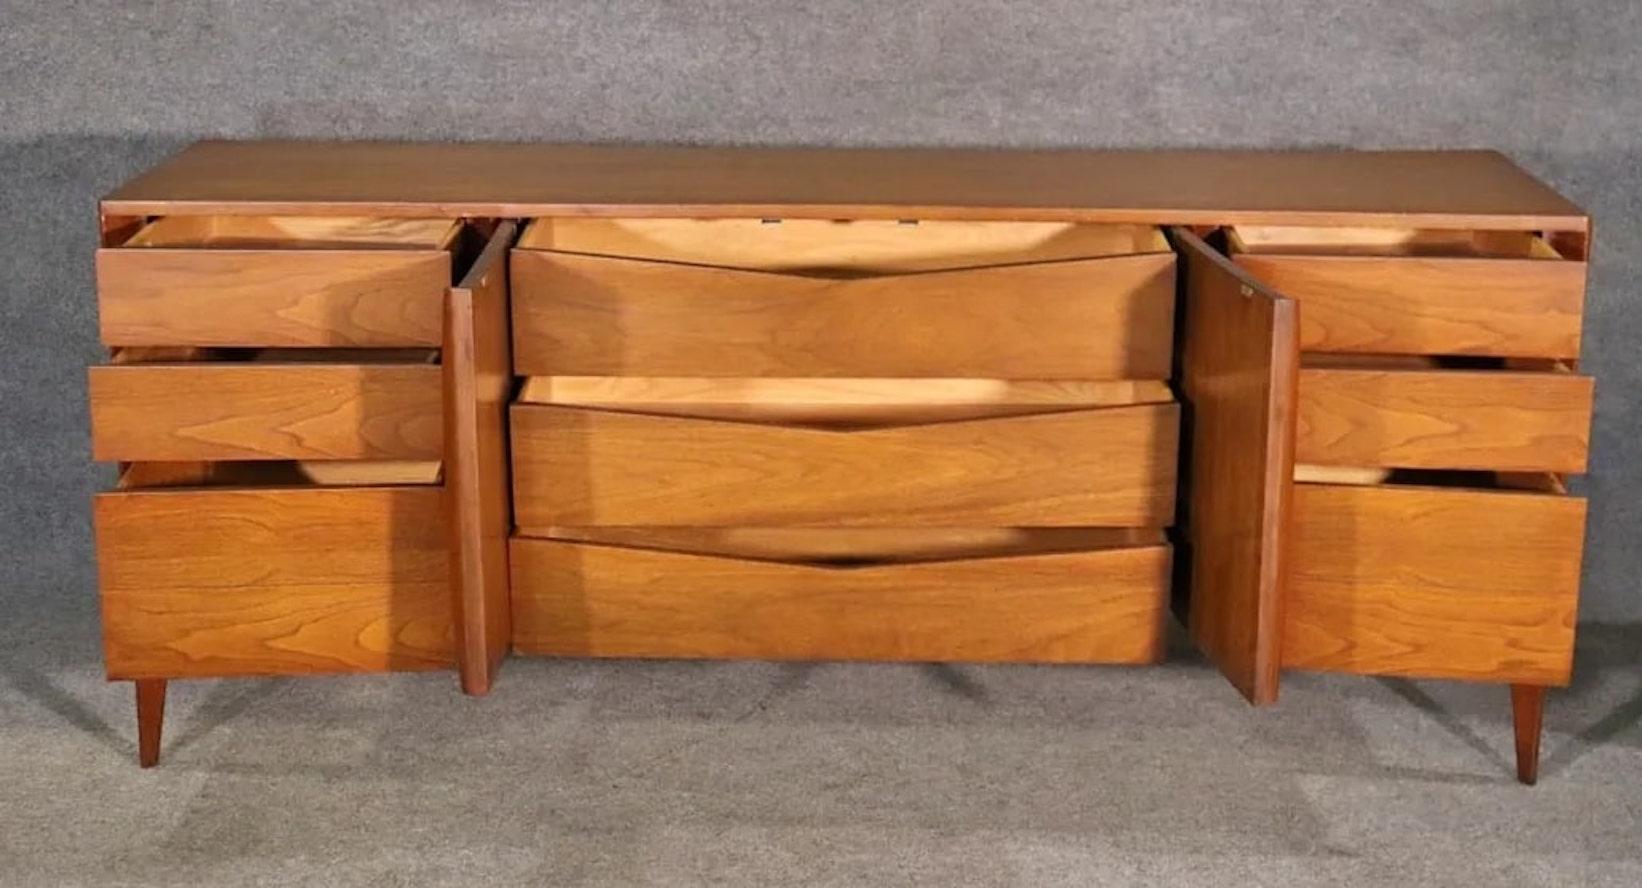 Vintage walnut dresser by Unagusta with curved front. Nine total drawers, sculpted front doors and tapered legs.
Please confirm location NY or NJ